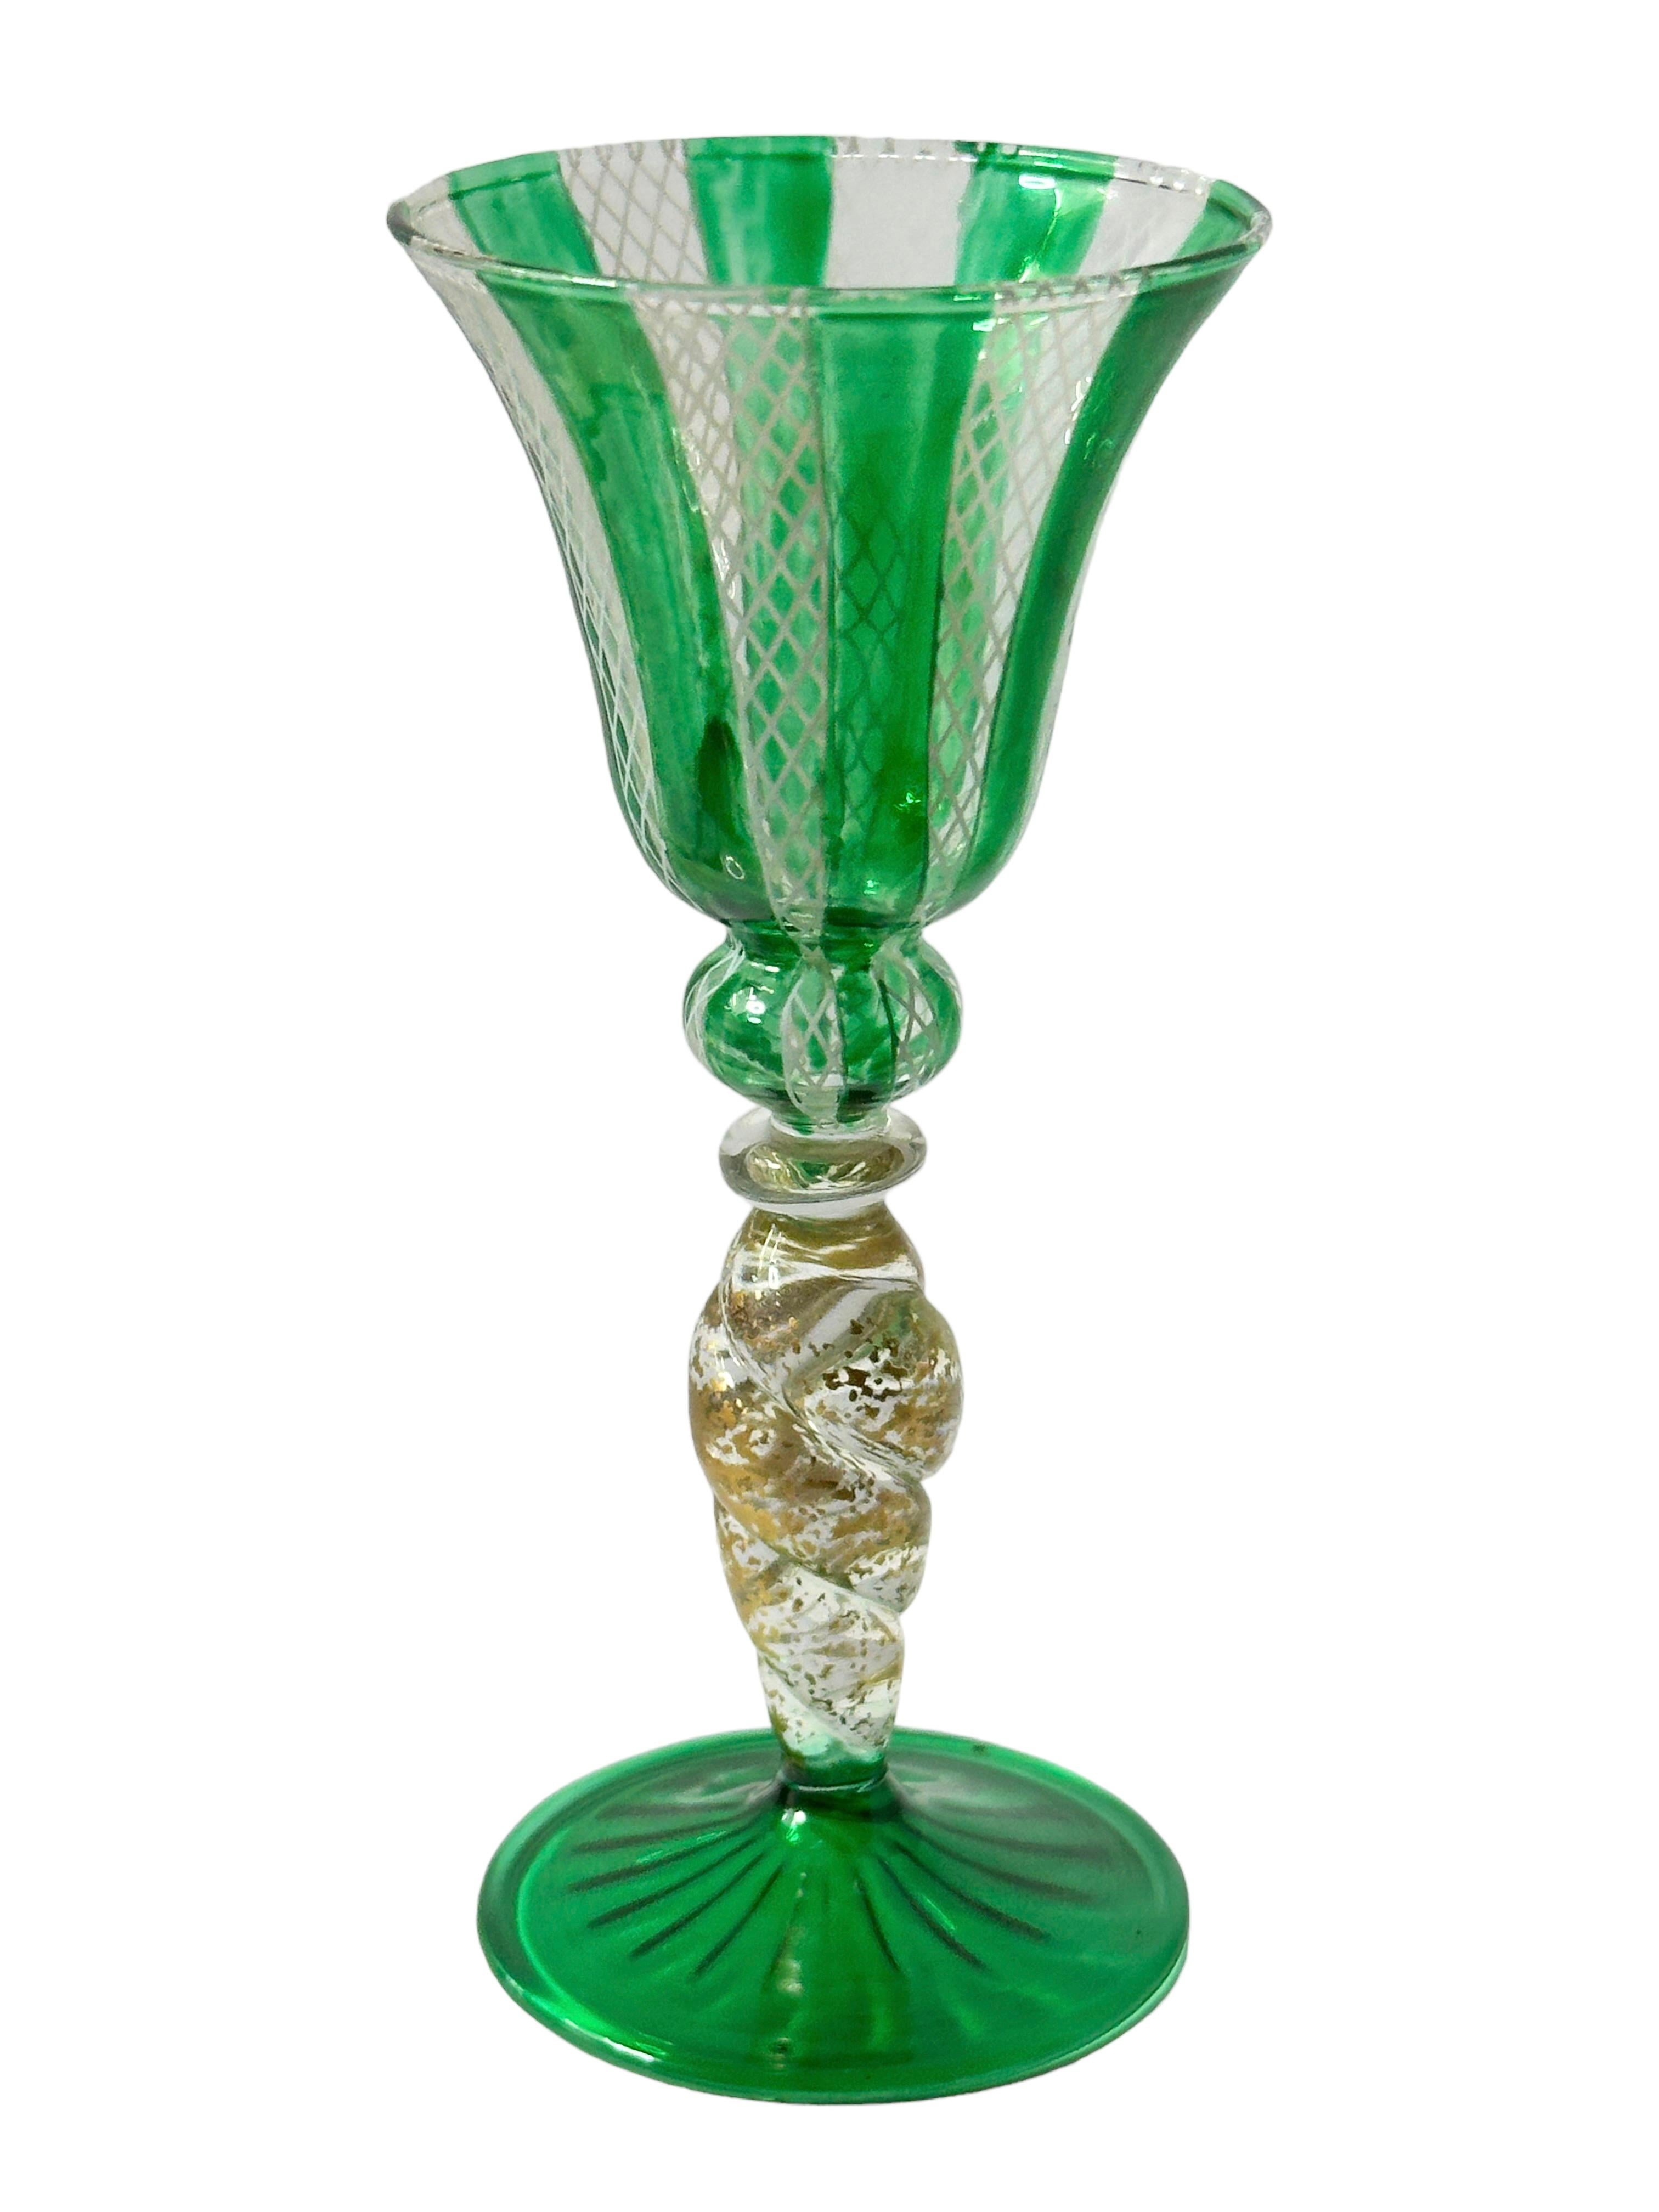 20th Century Green & Gold Stardust Salviati Murano Glass Liqueur Goblet, Vintage Italy  For Sale